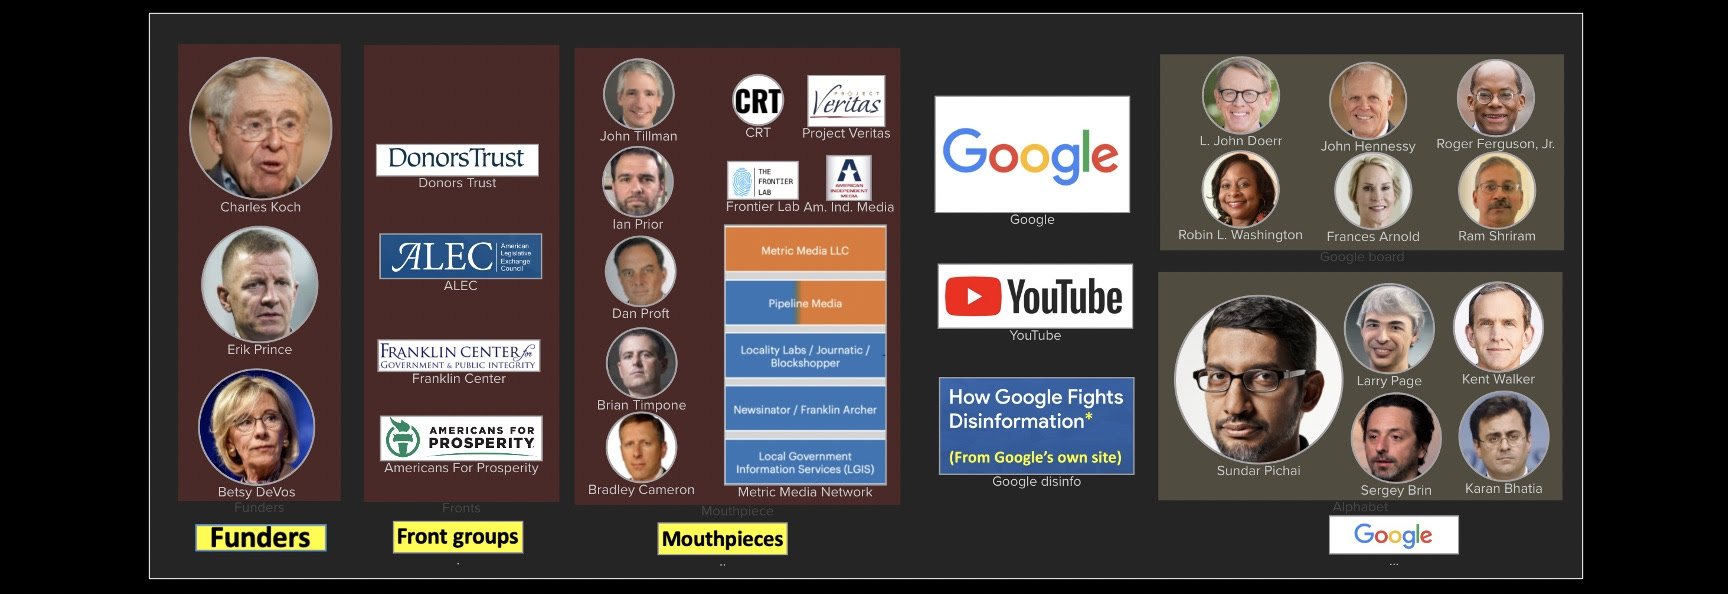 How Google spreads right wing disinfo funded by Charles Koch, Erik Prince, Betsy DeVos and Donors Trust.